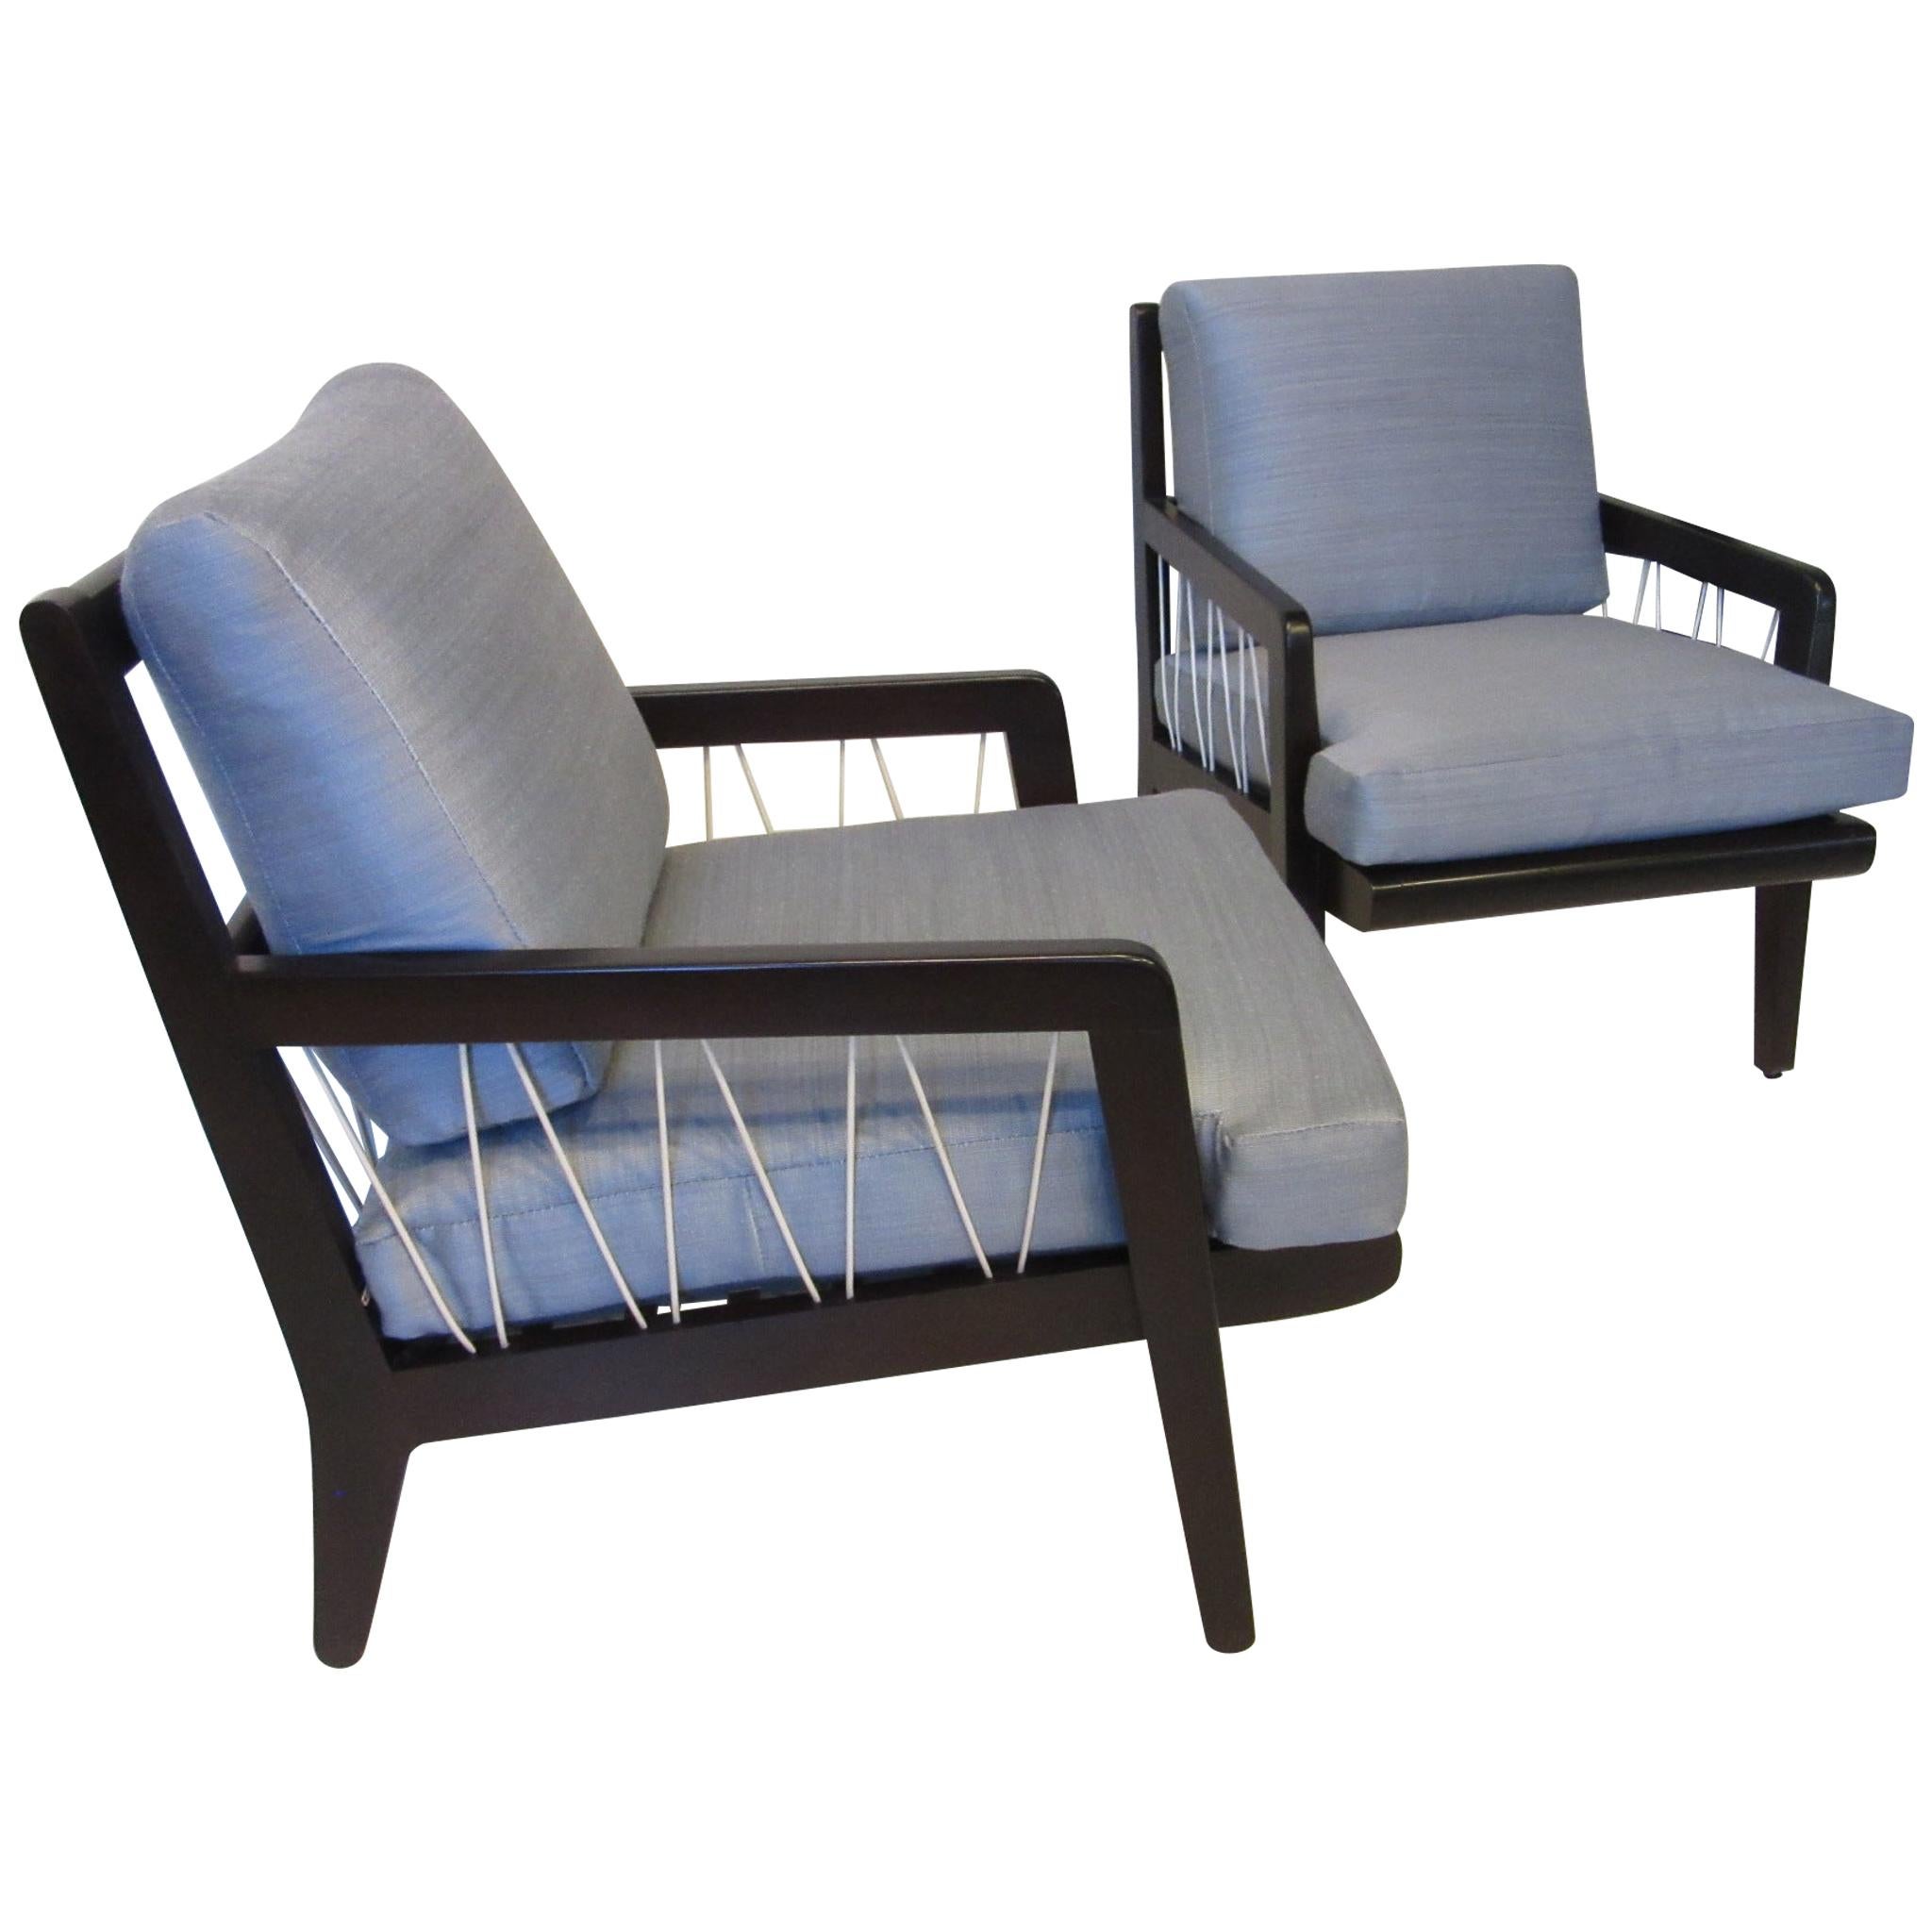 Edward Wormley Presedent Lounge Chairs for Drexel